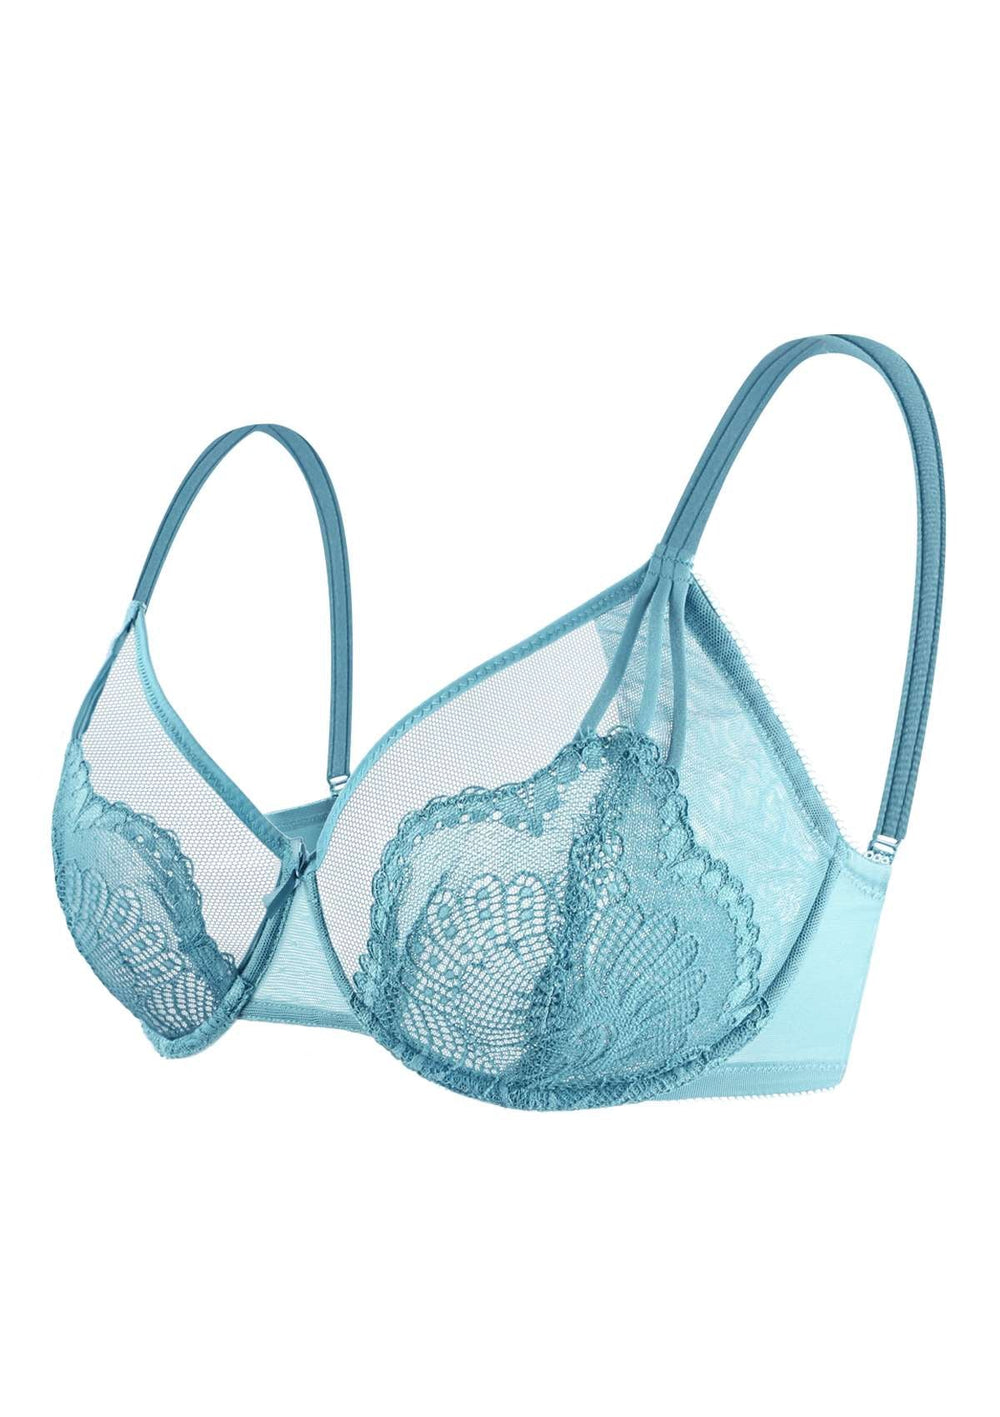 HANA LADIES FLORAL LACE PADDED AND WIRED FULL CUP BRA BLUE C CUP NEW (ref  157)